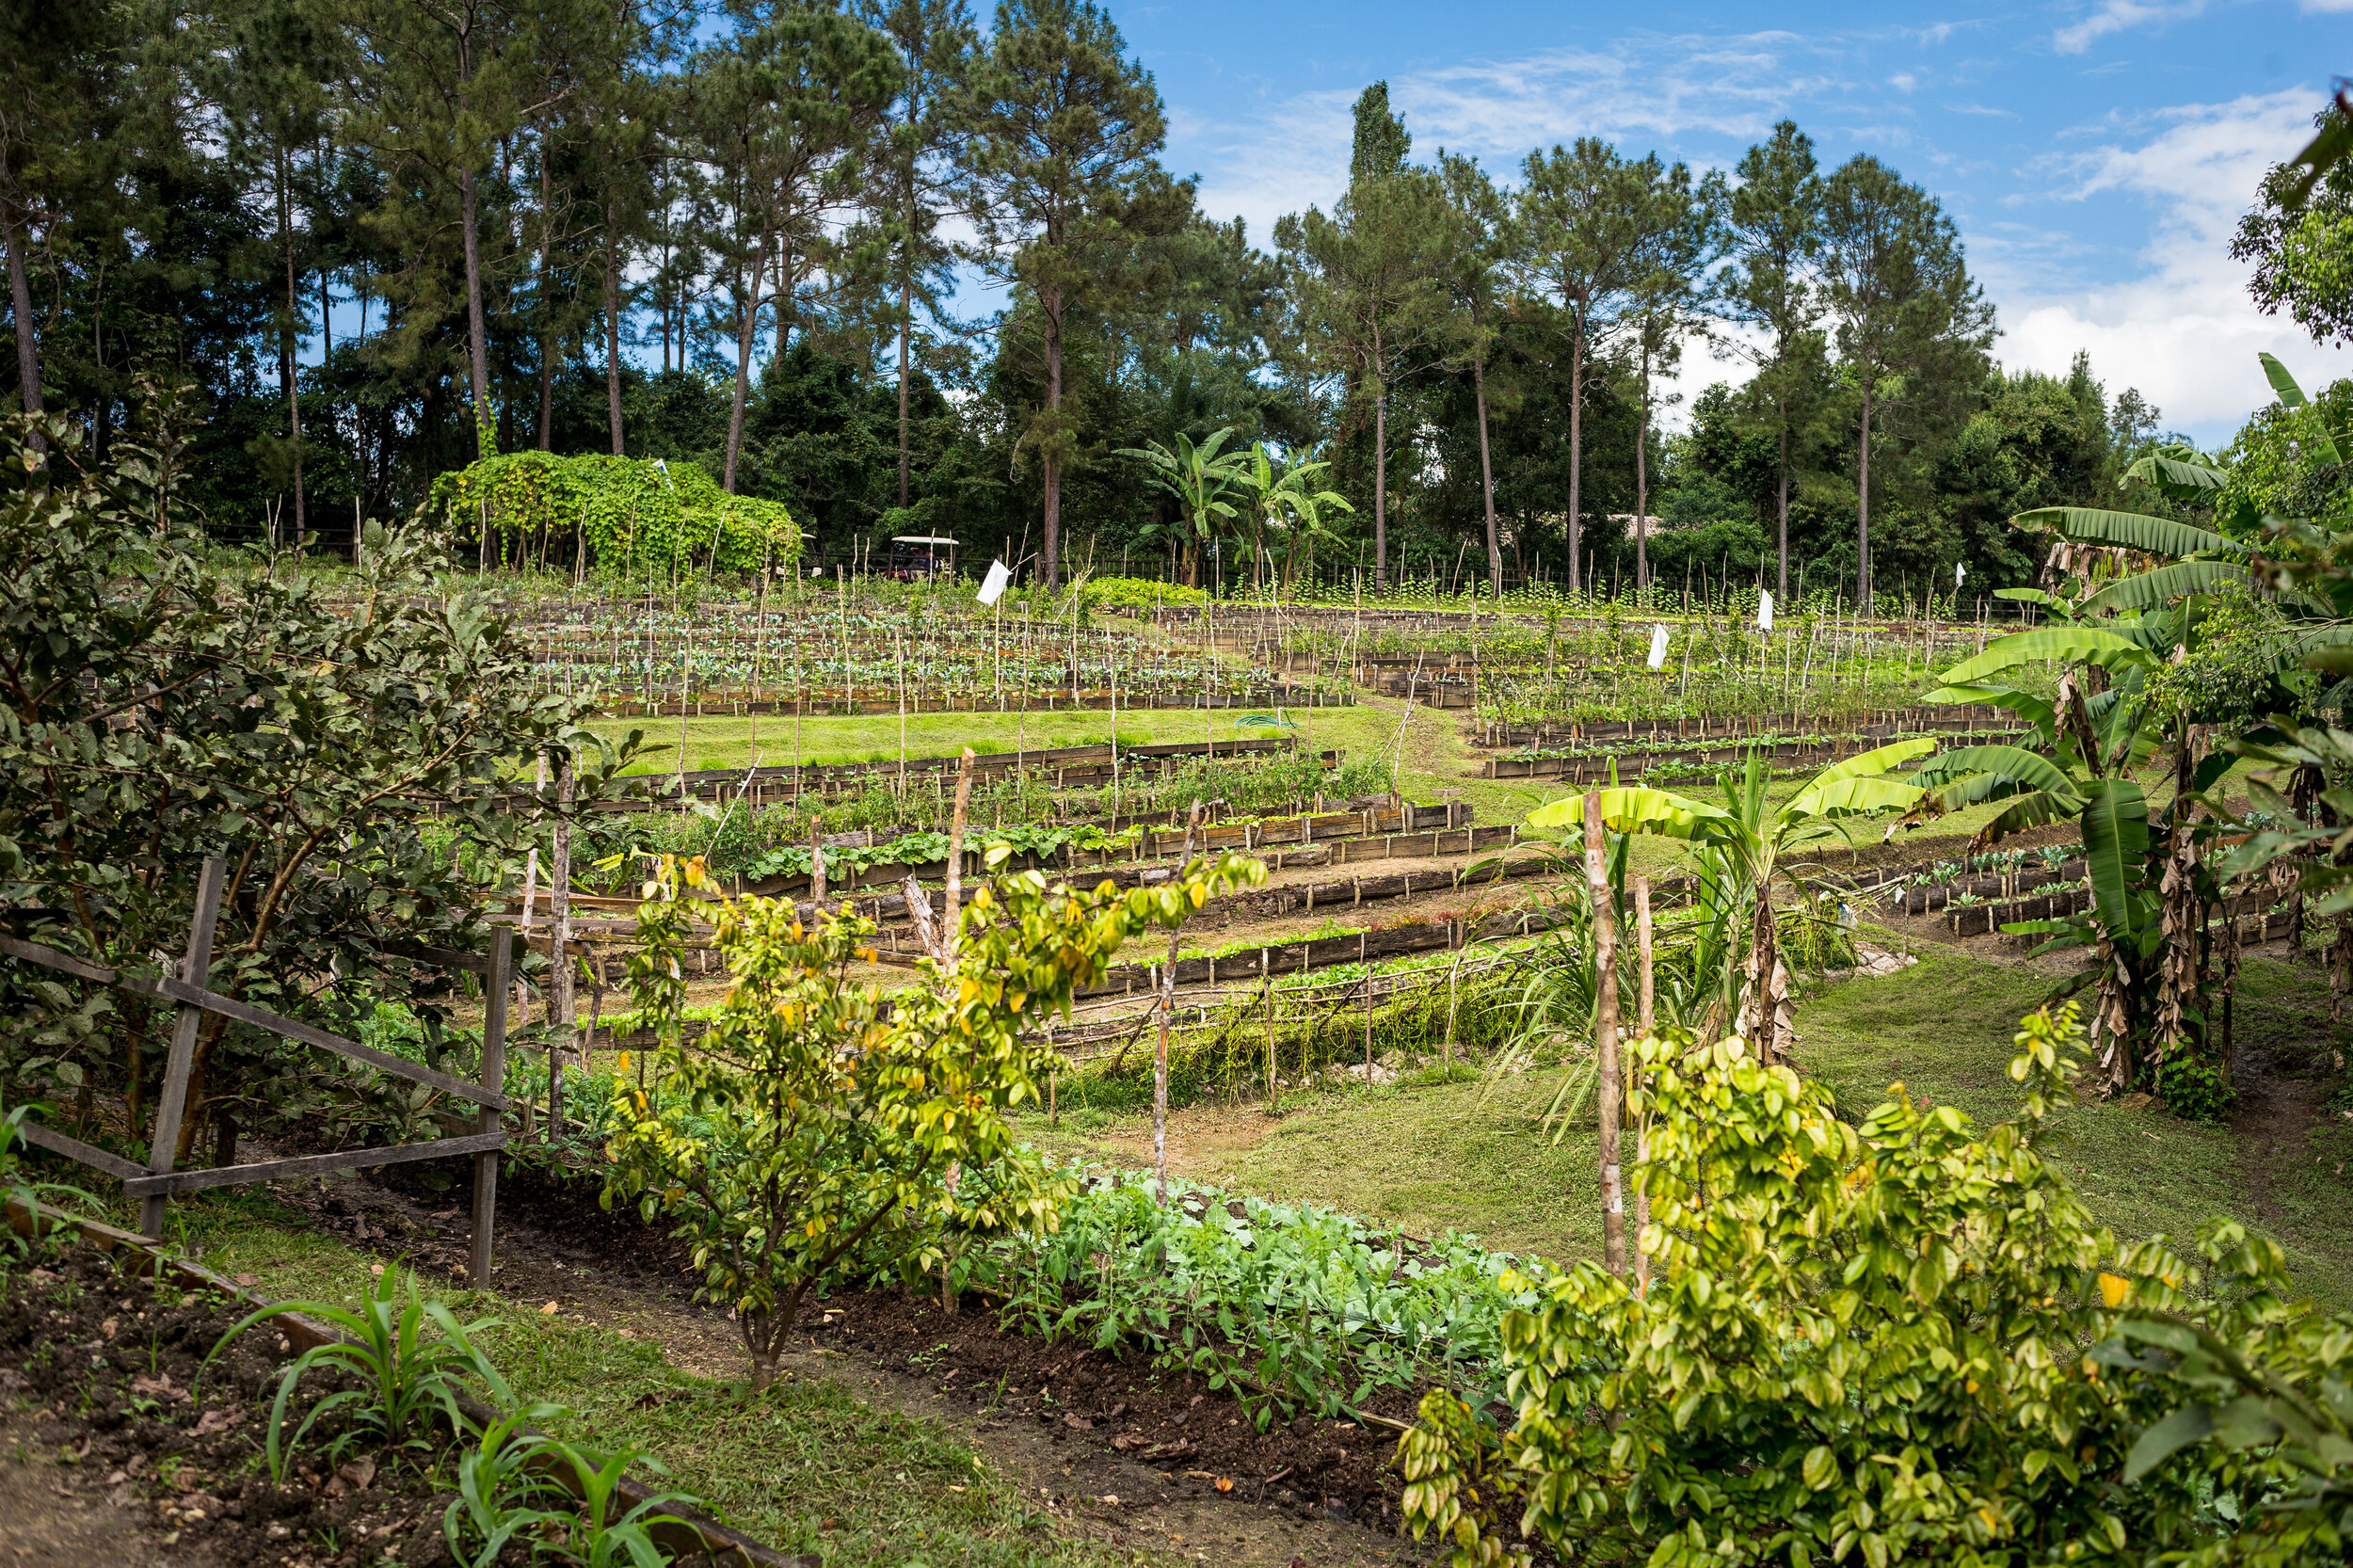   The incredible garden at Blancaneaux Lodge (photo credit: The Family Coppola Hideaways)  